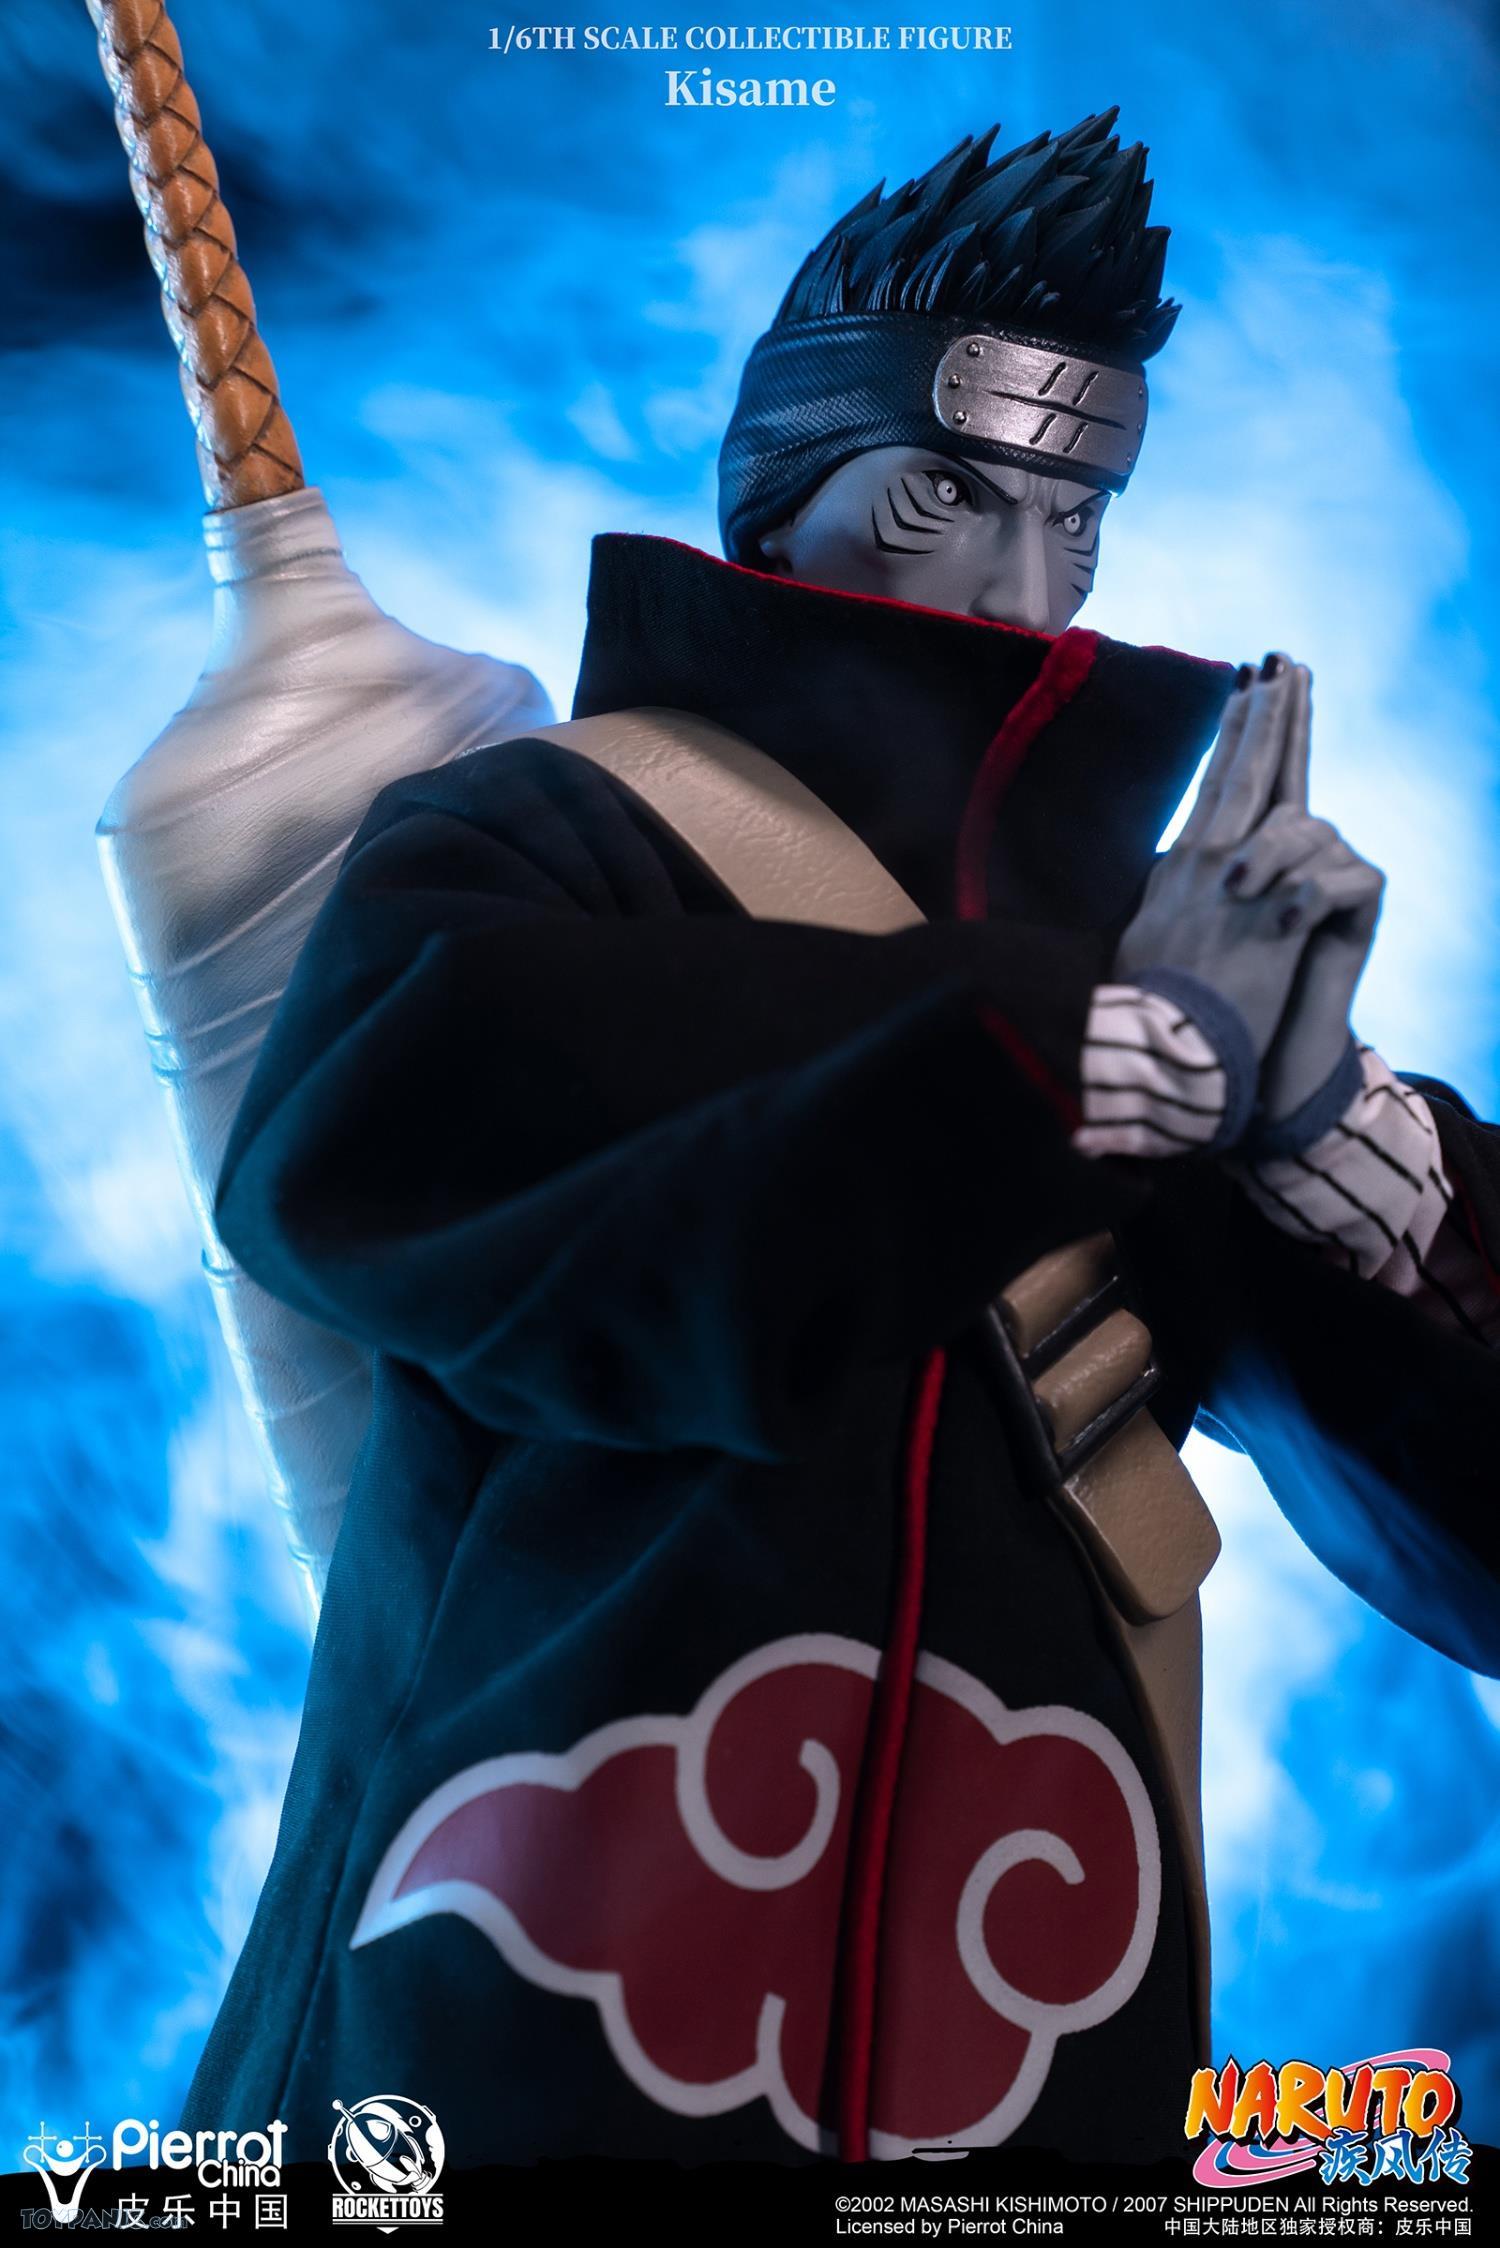 RocketToys - NEW PRODUCT: Rocket Toys ROC-007 1/6 Scale Kisame 221202460438PM_9720868